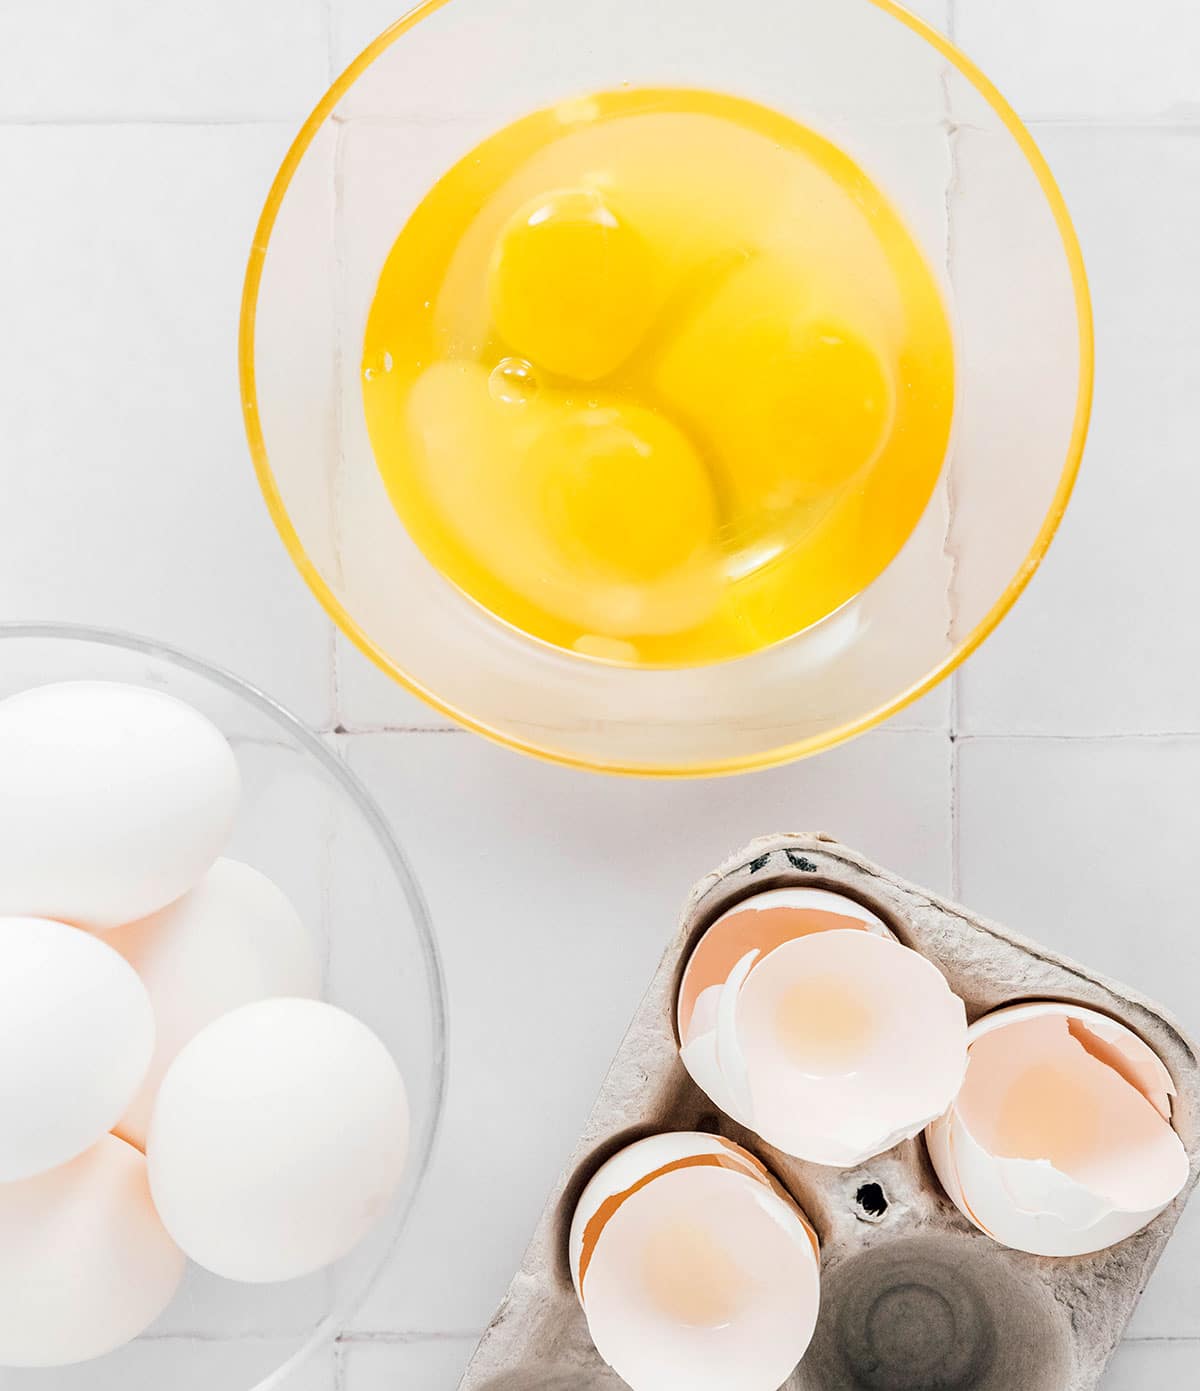 A bowl of cracked eggs next to a bowl of whole eggs, sitting by a carton of egg shells.